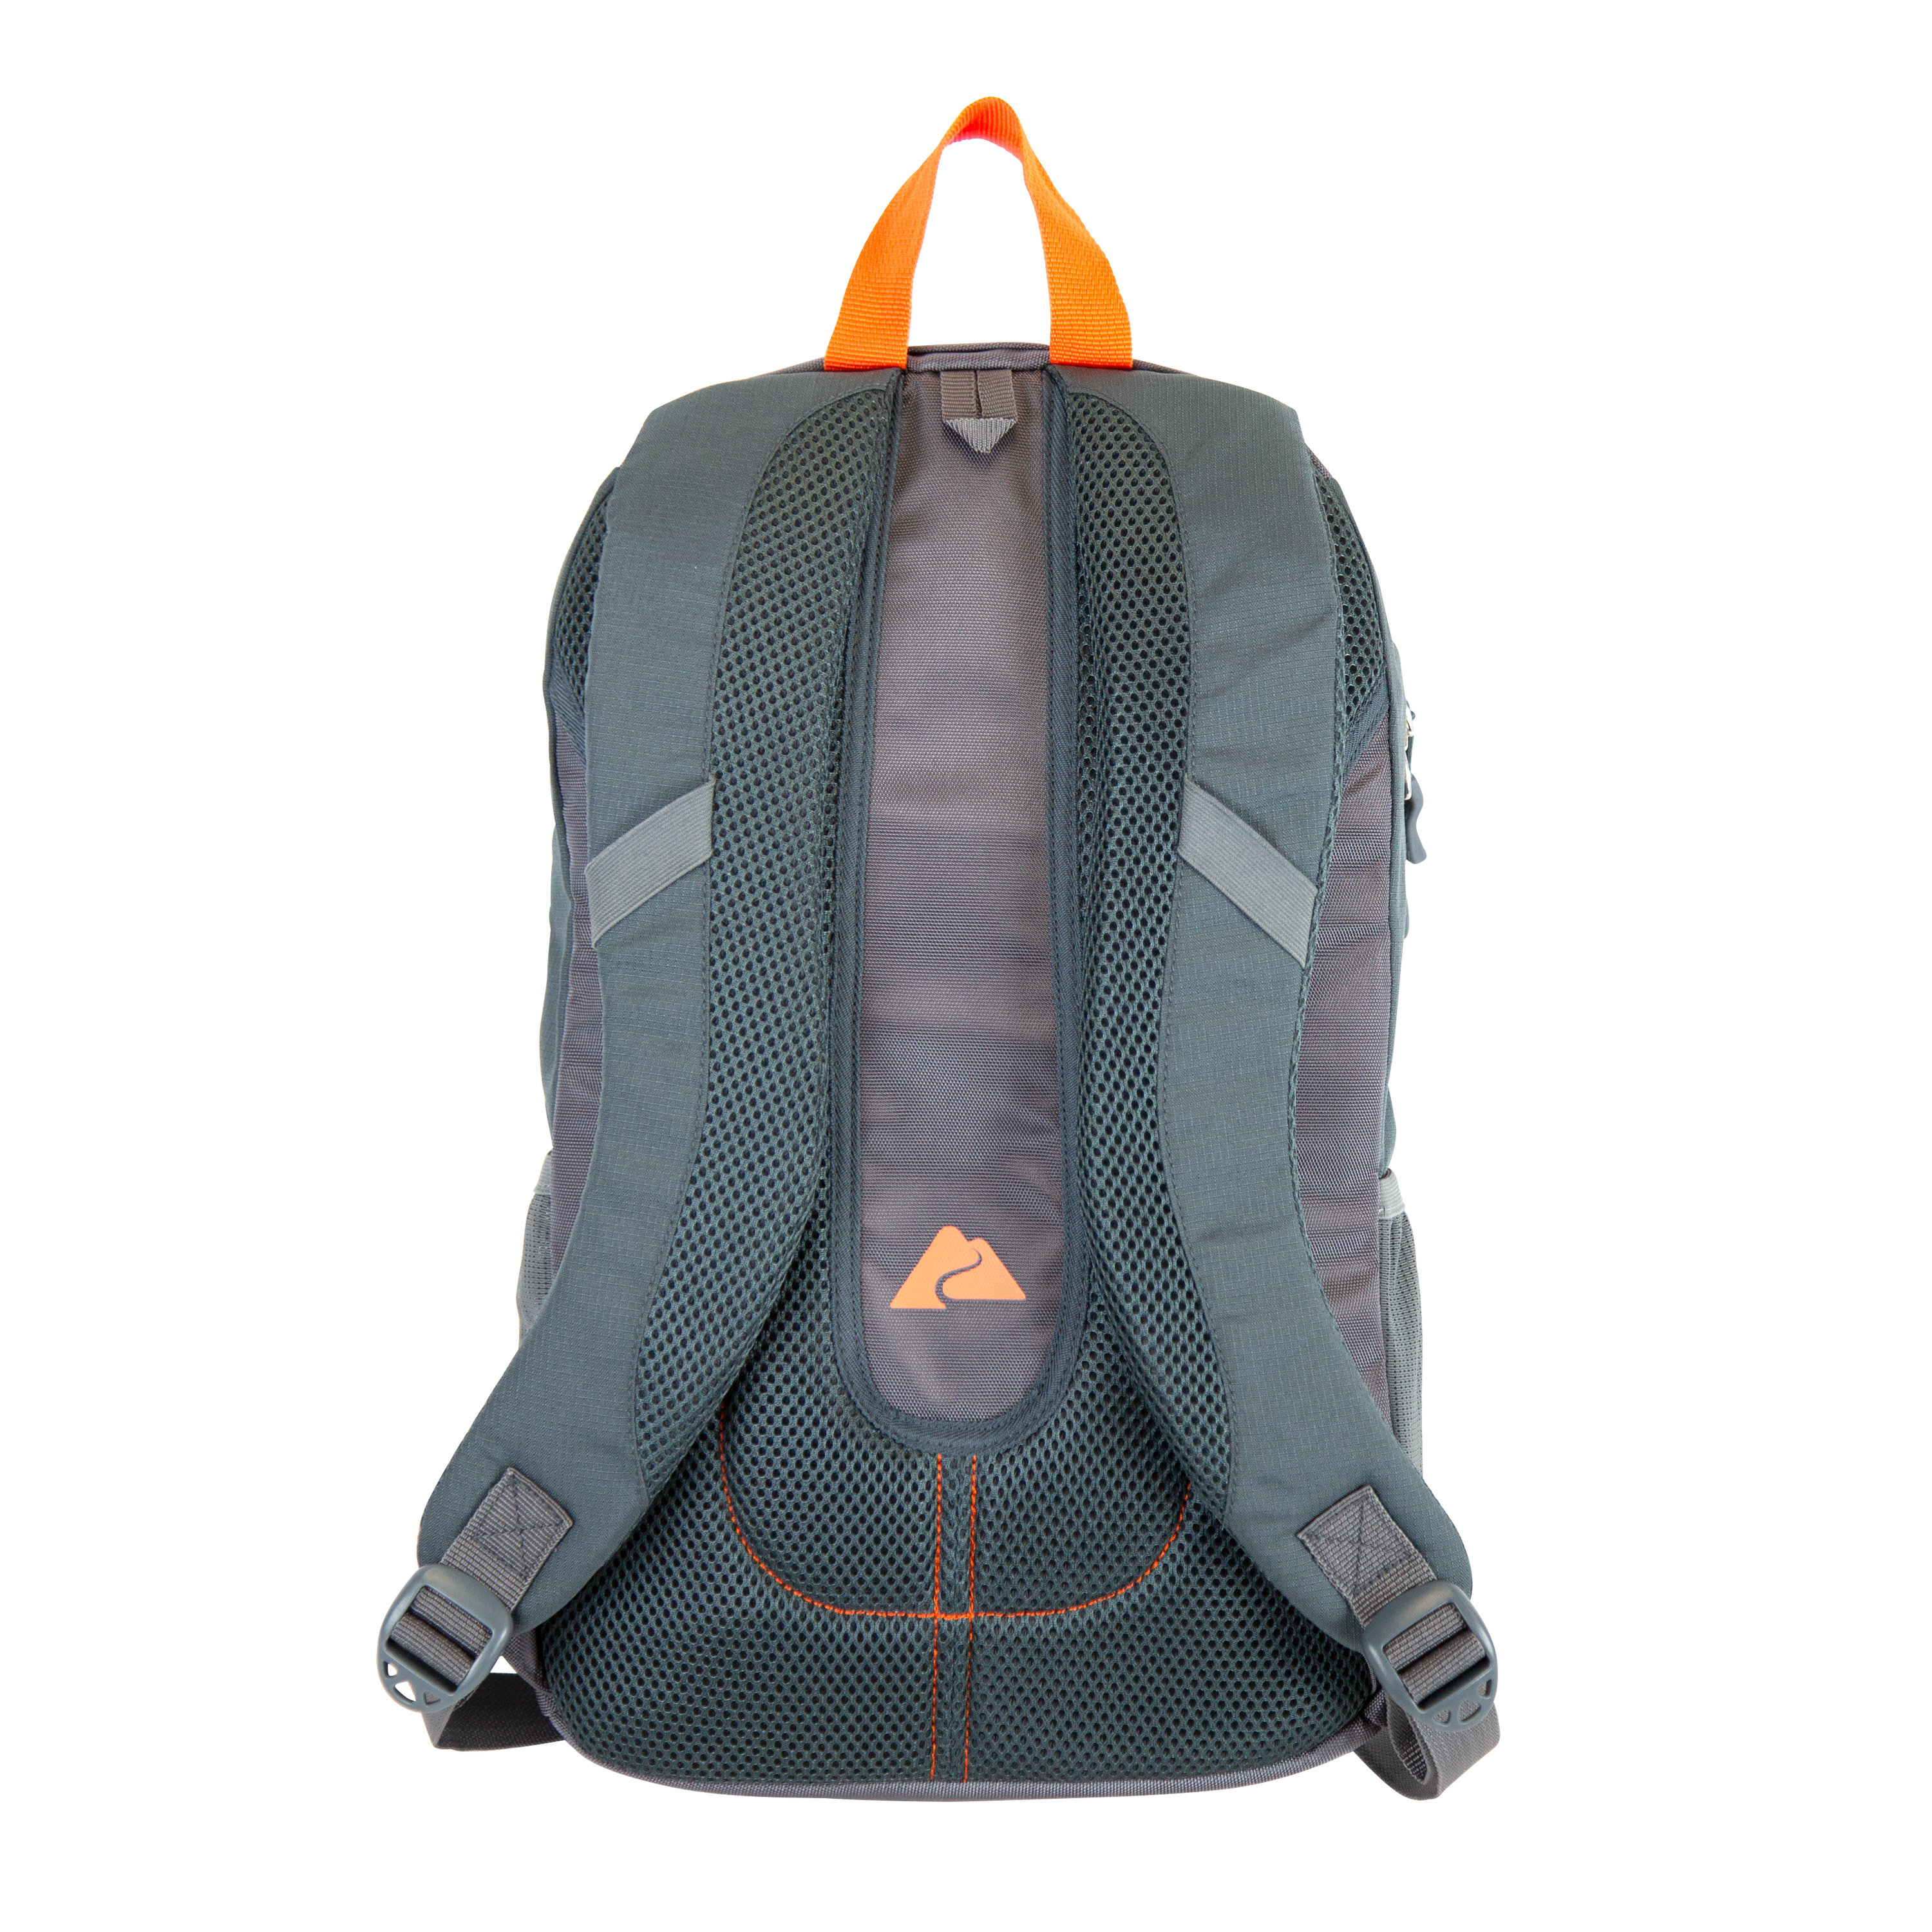 Ozark Trail 20L Thomas Hollow Backpack with Insulated Cooler Pocket, Gray, Solid Pattern - image 5 of 9